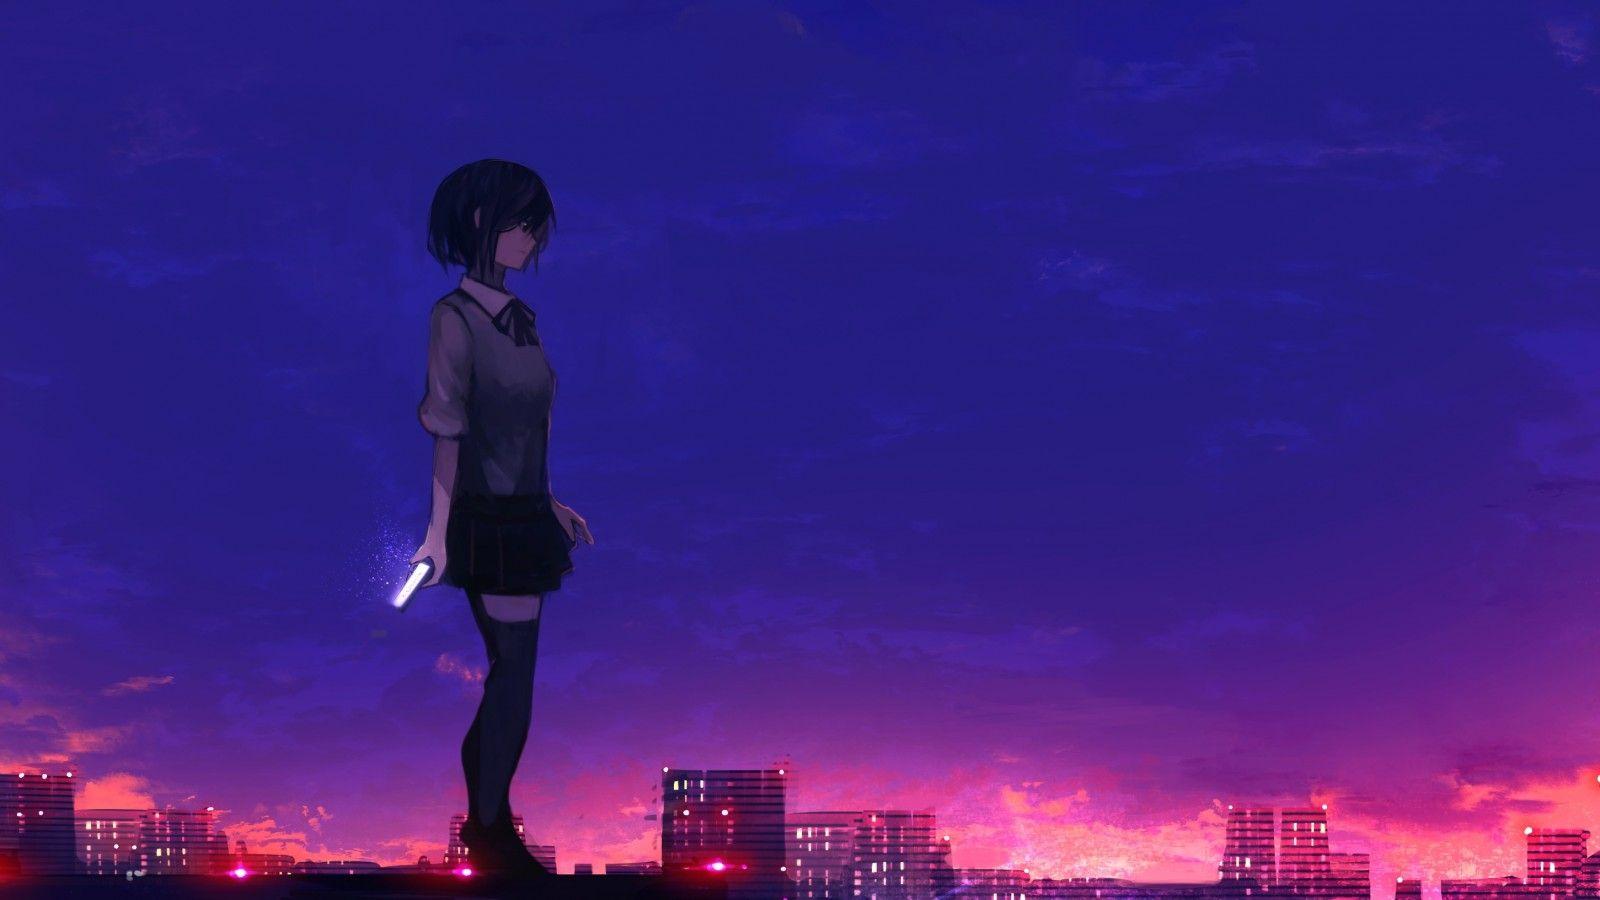 Building Background Anime Rooftop Night - The best gifs are on giphy.